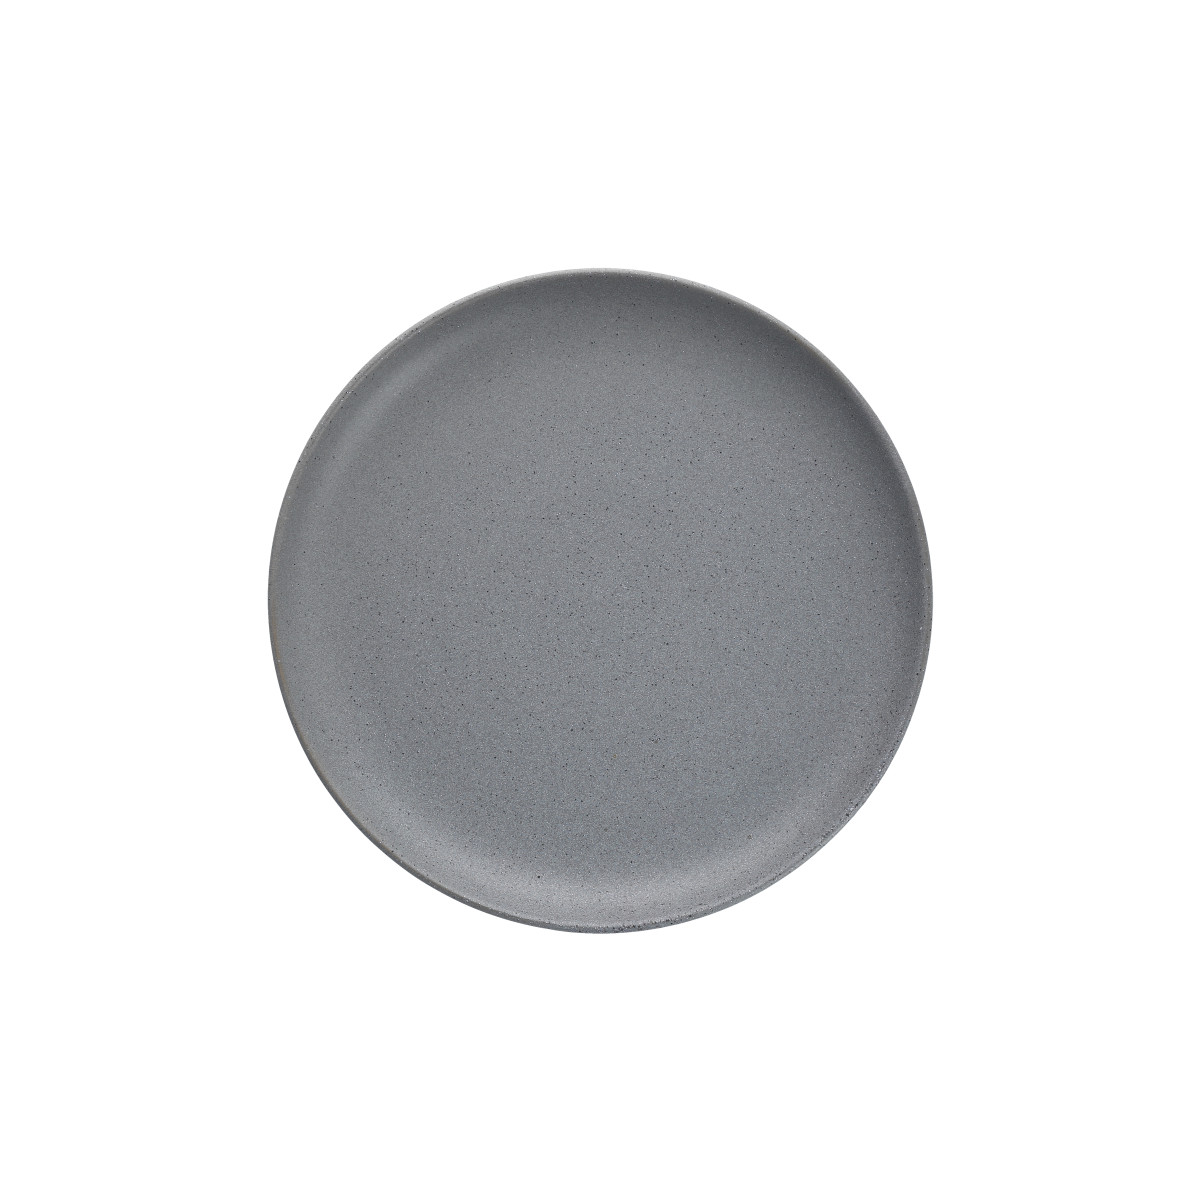 Sound Dinner Plate, Cement, Set of 4